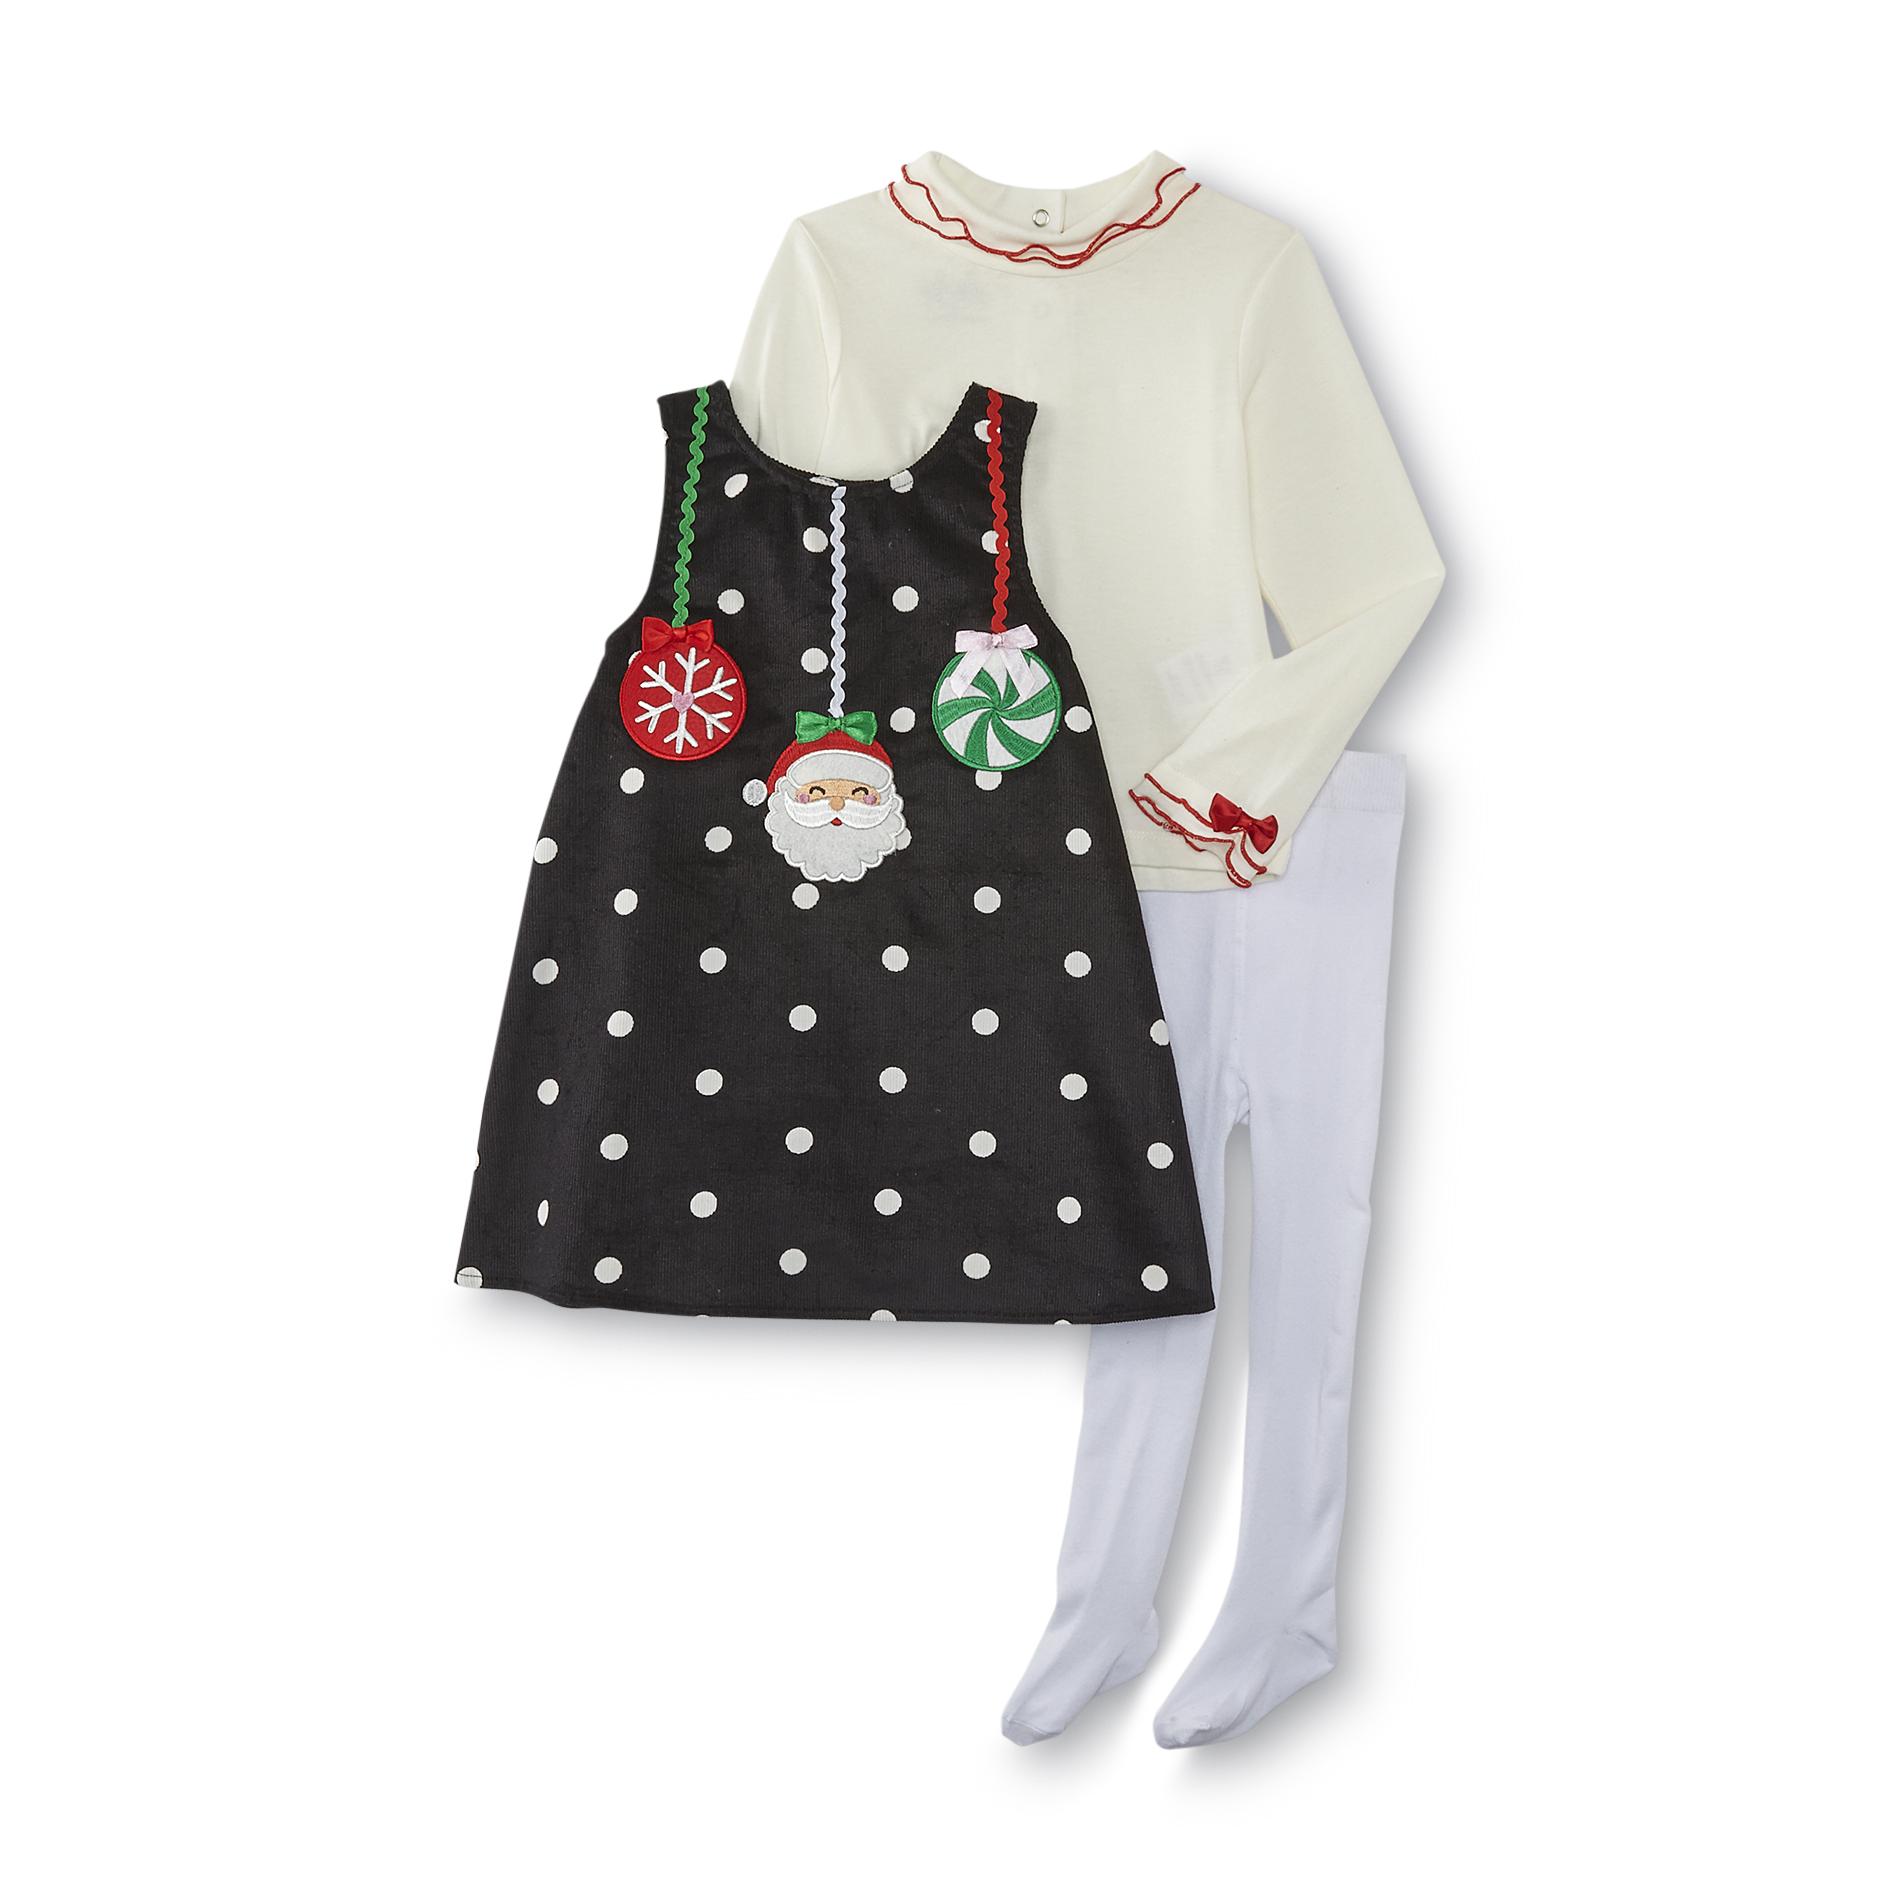 Holiday Editions Infant & Toddler Girl's Christmas Jumper  Top & Tights